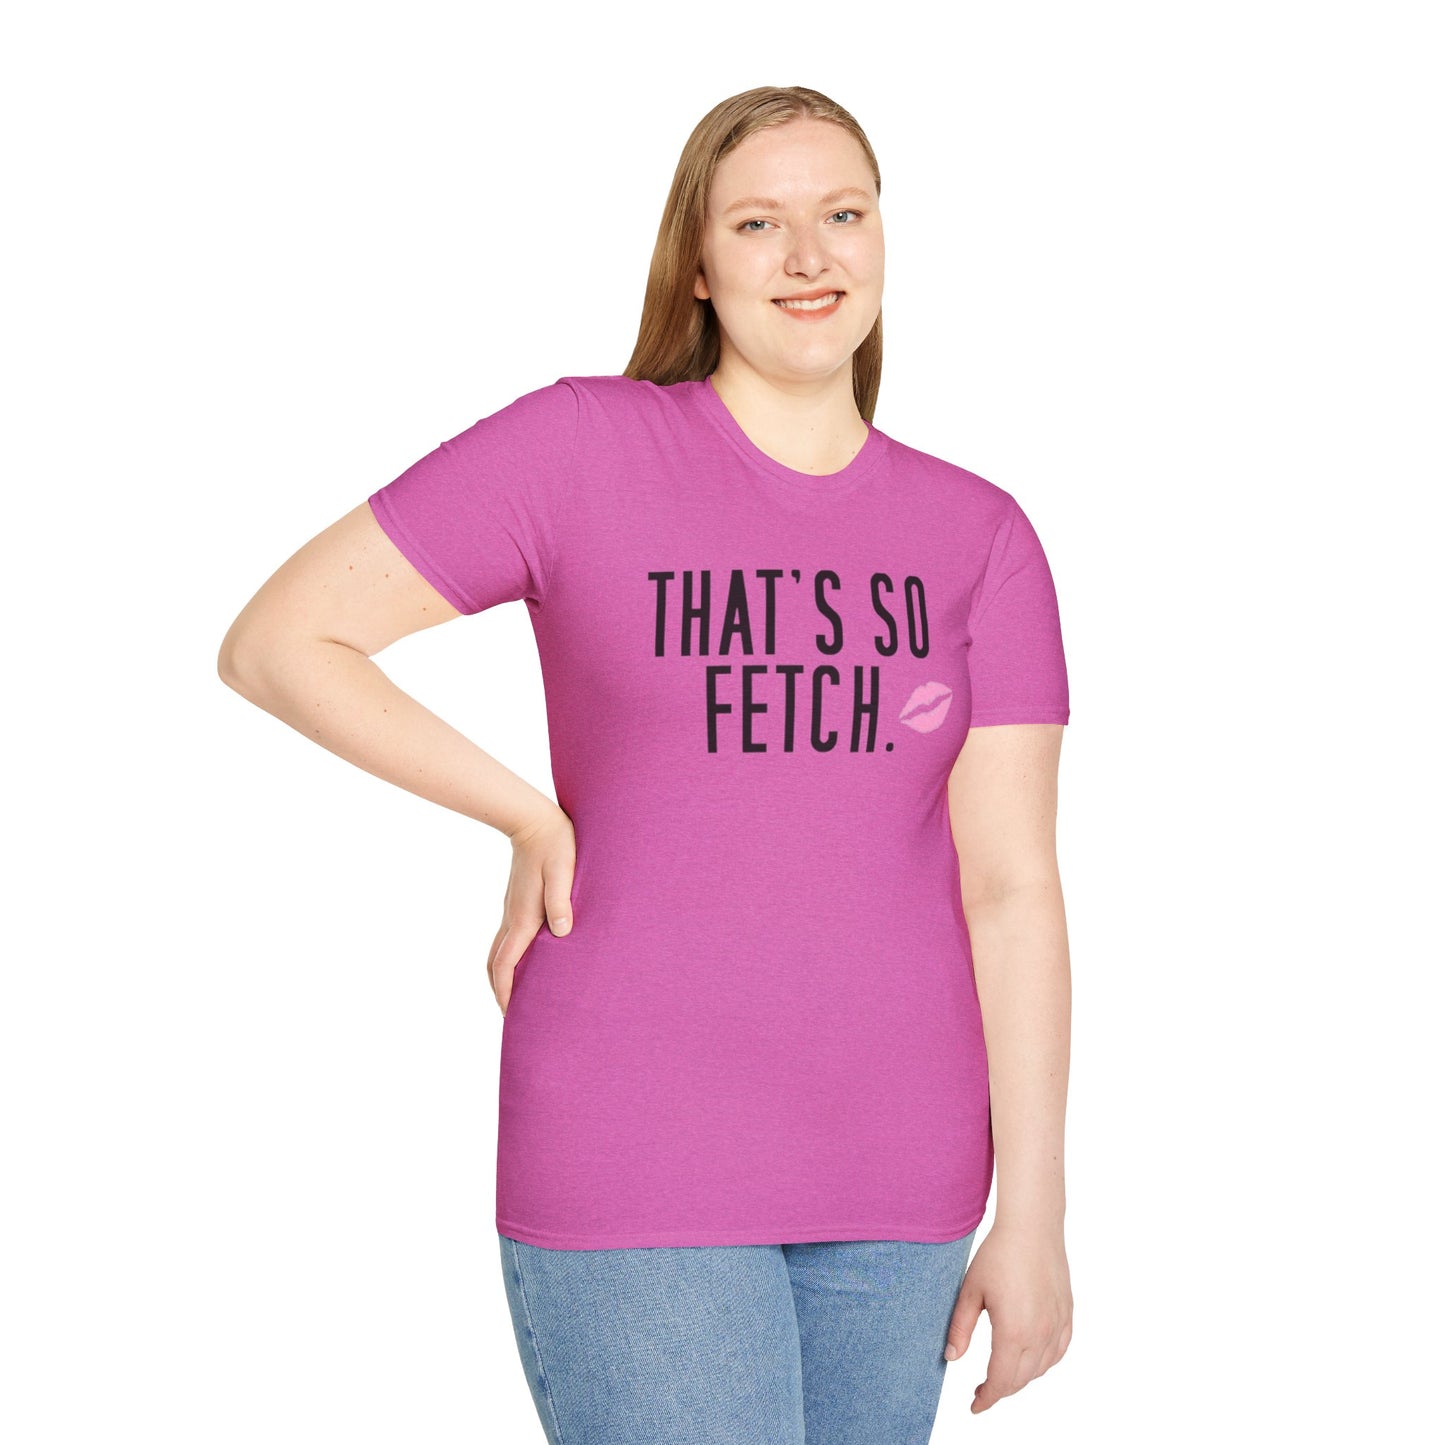 Thats so fetch - Unisex Softstyle T-Shirt